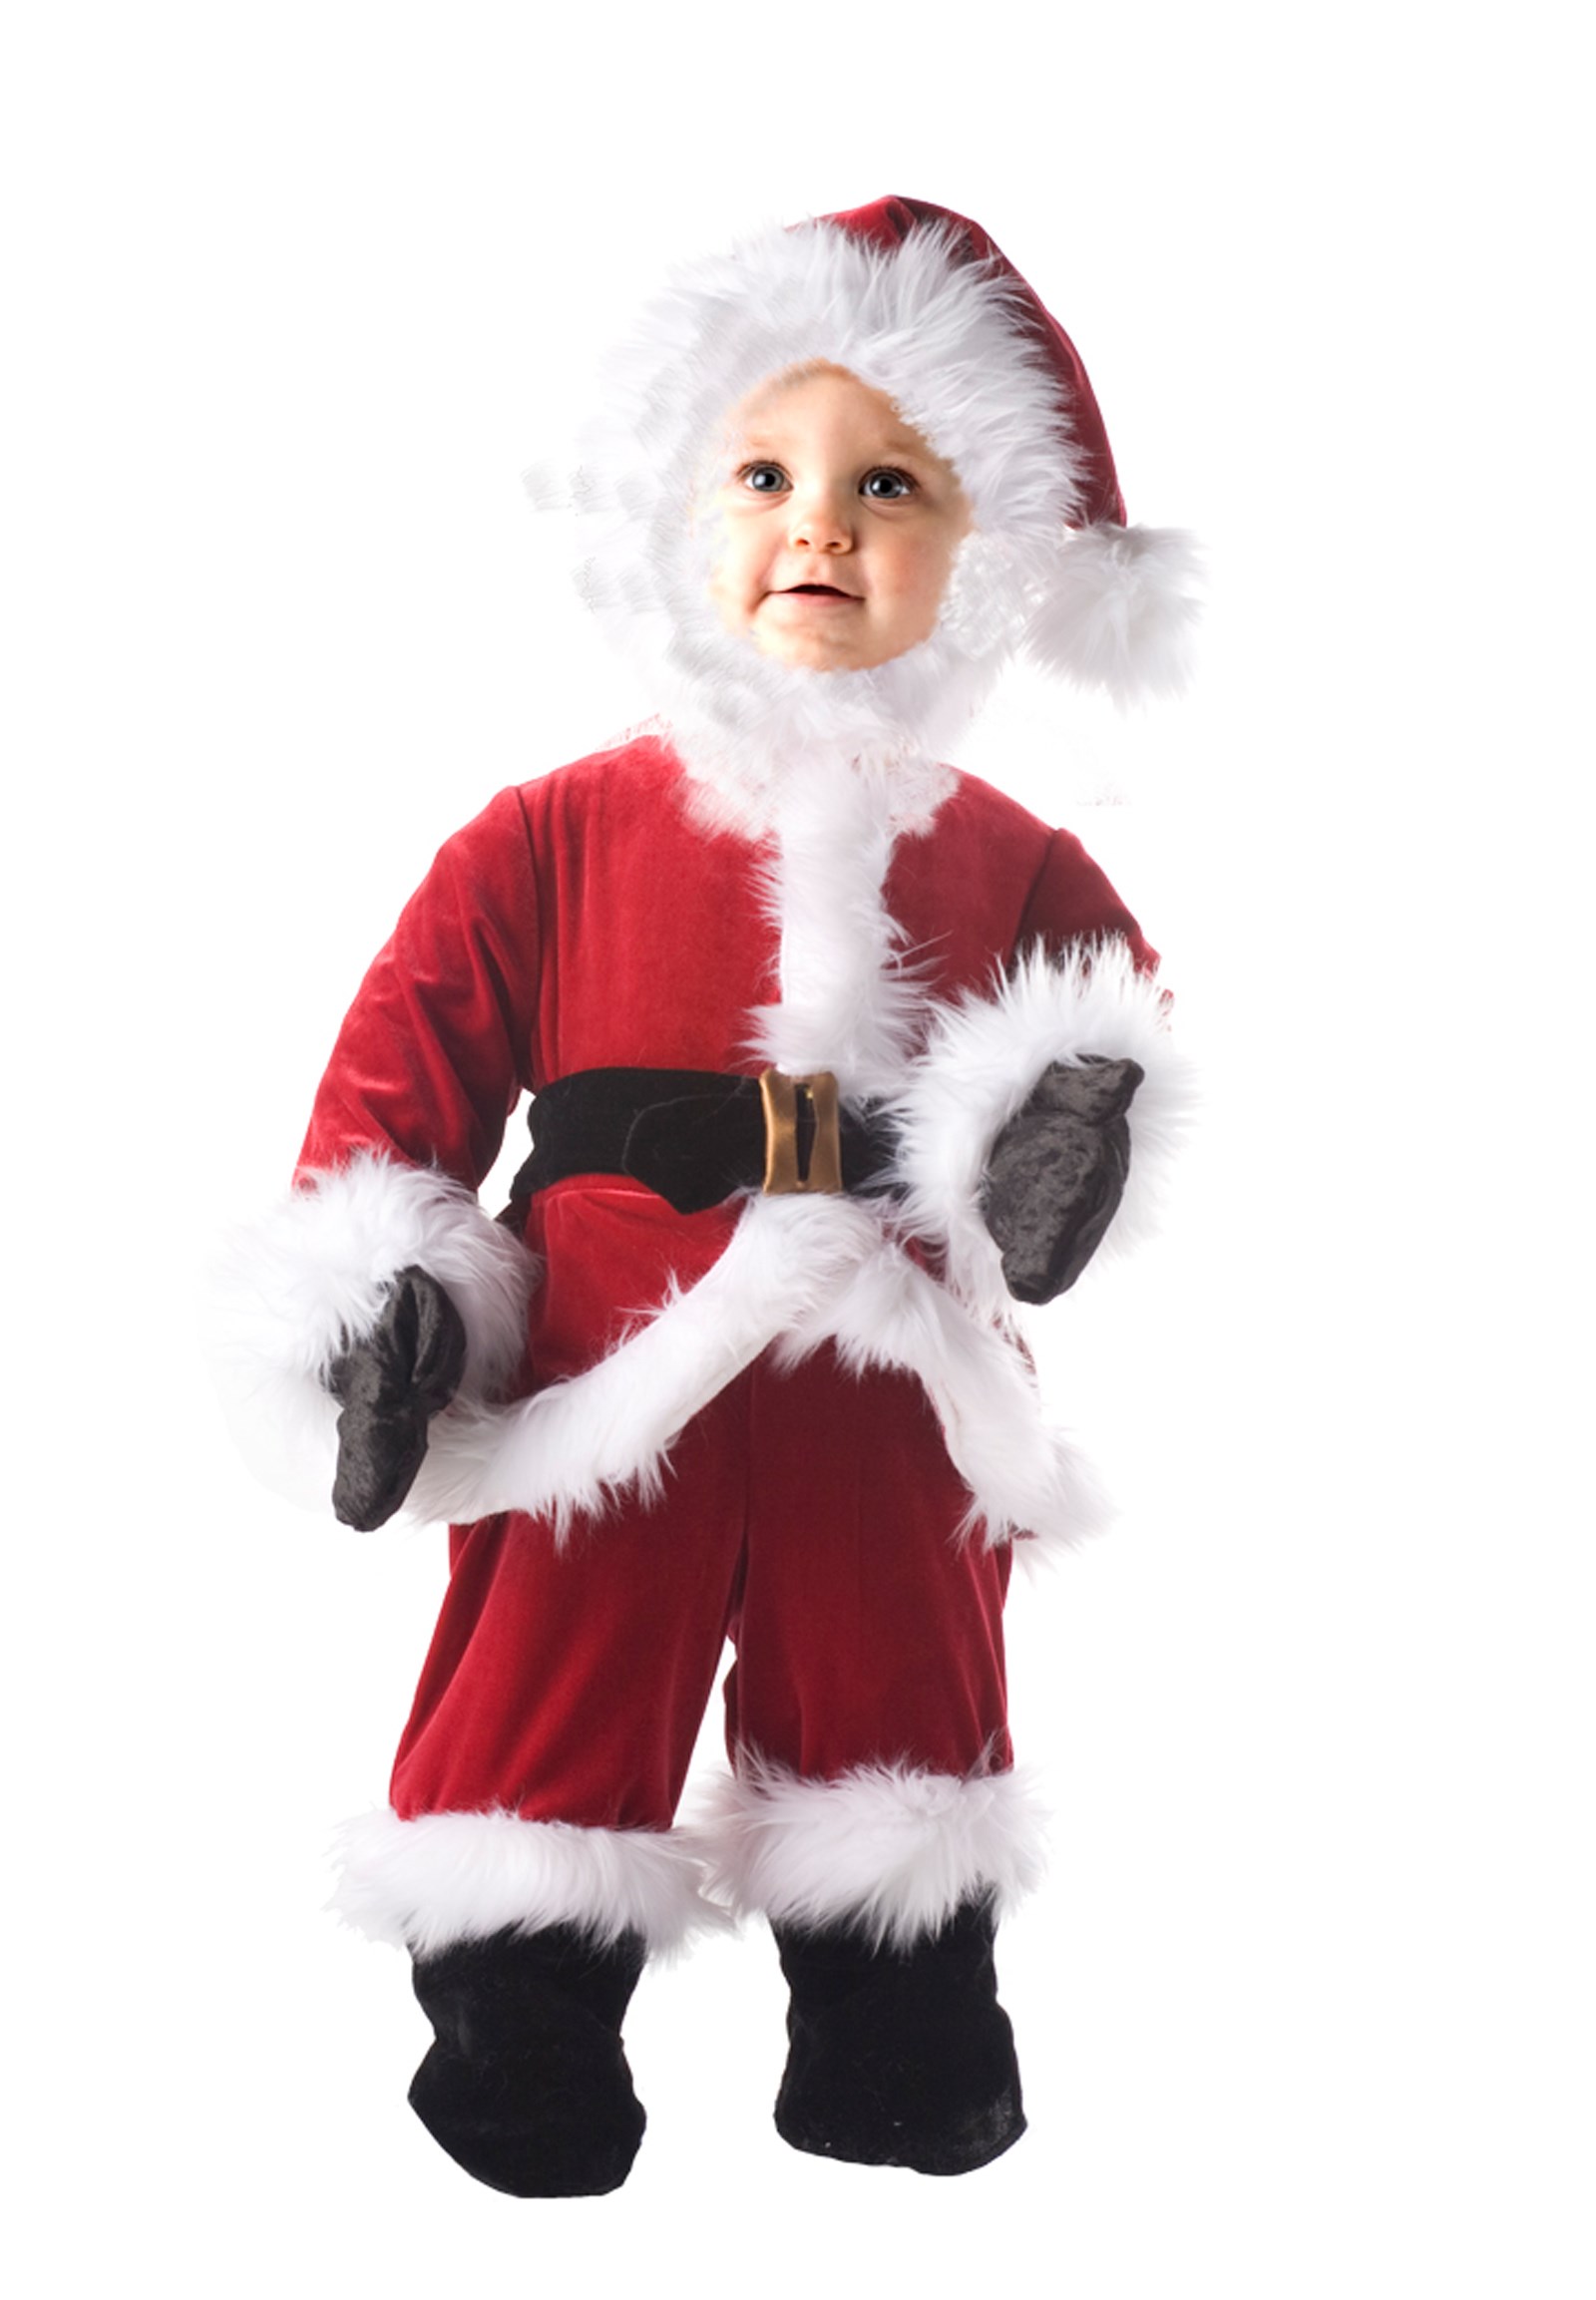 Clearance Makeup on Discount Santa Suits For Sale   Santa Claus Costumes For Kids  Women